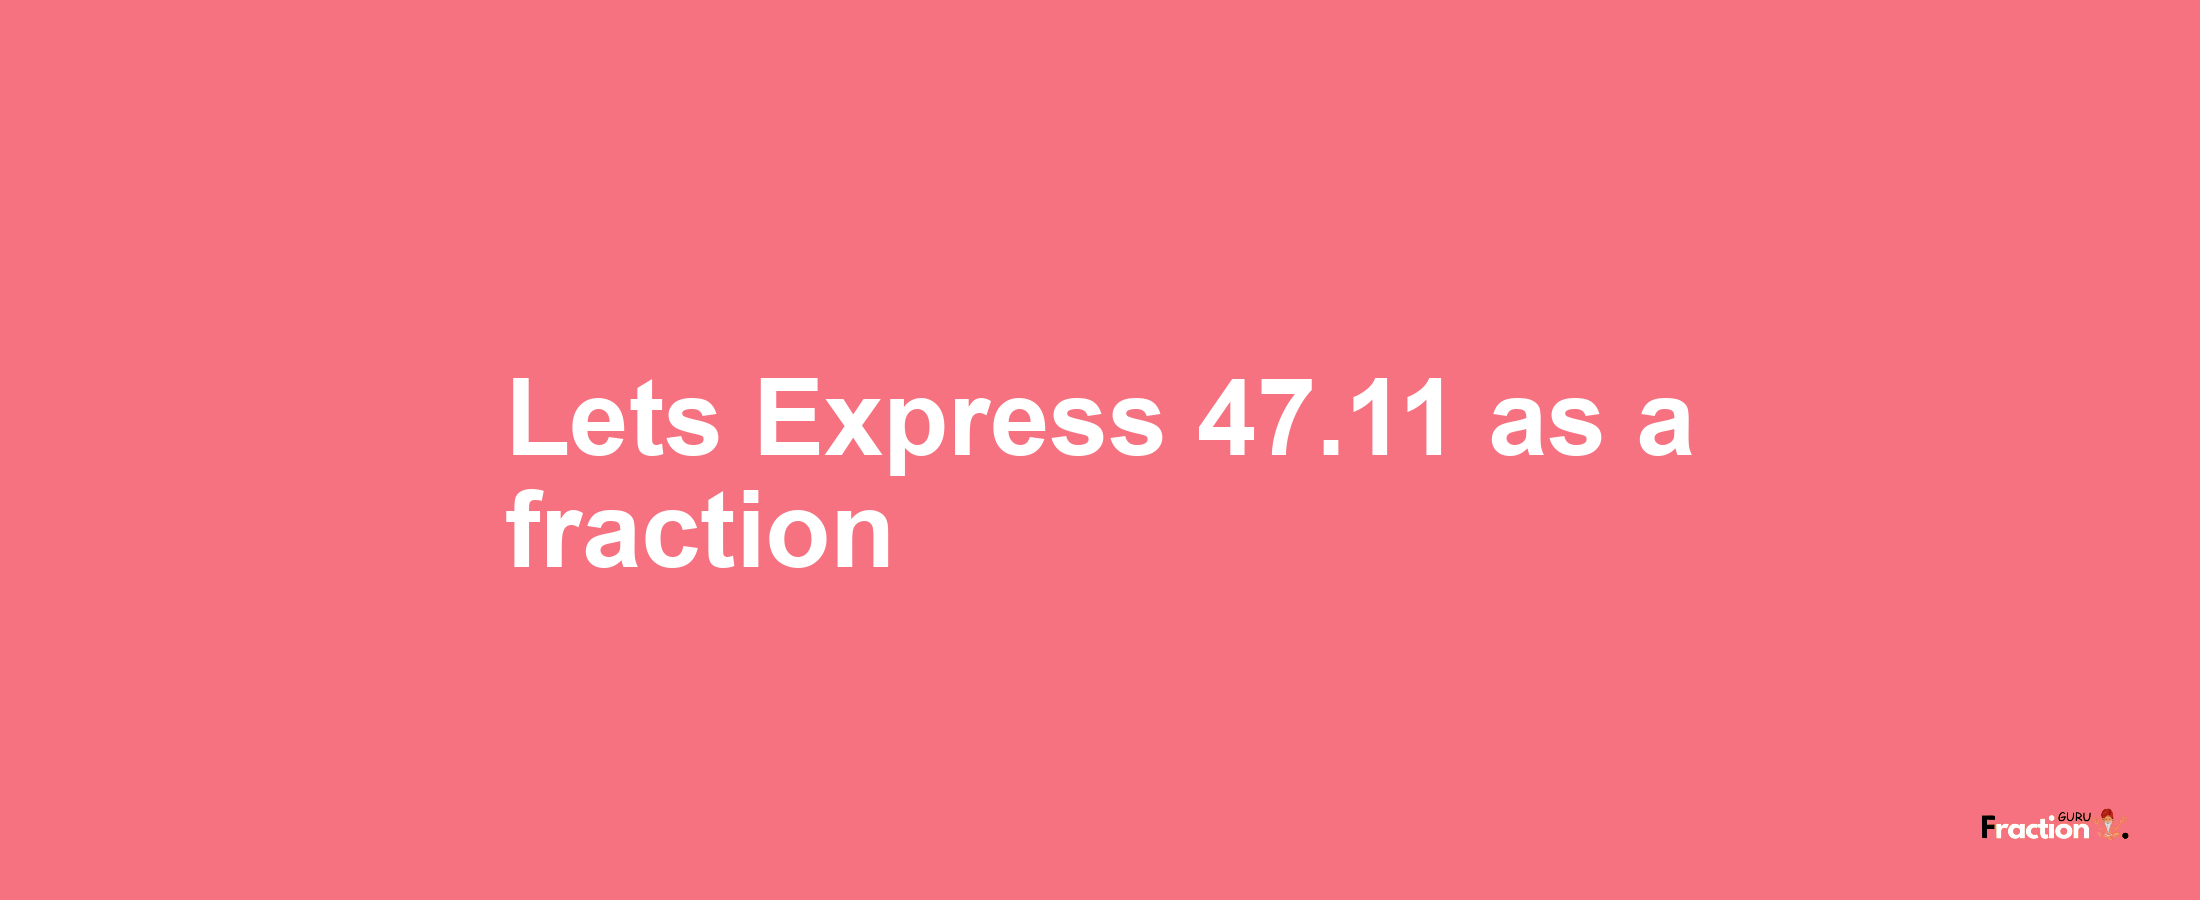 Lets Express 47.11 as afraction